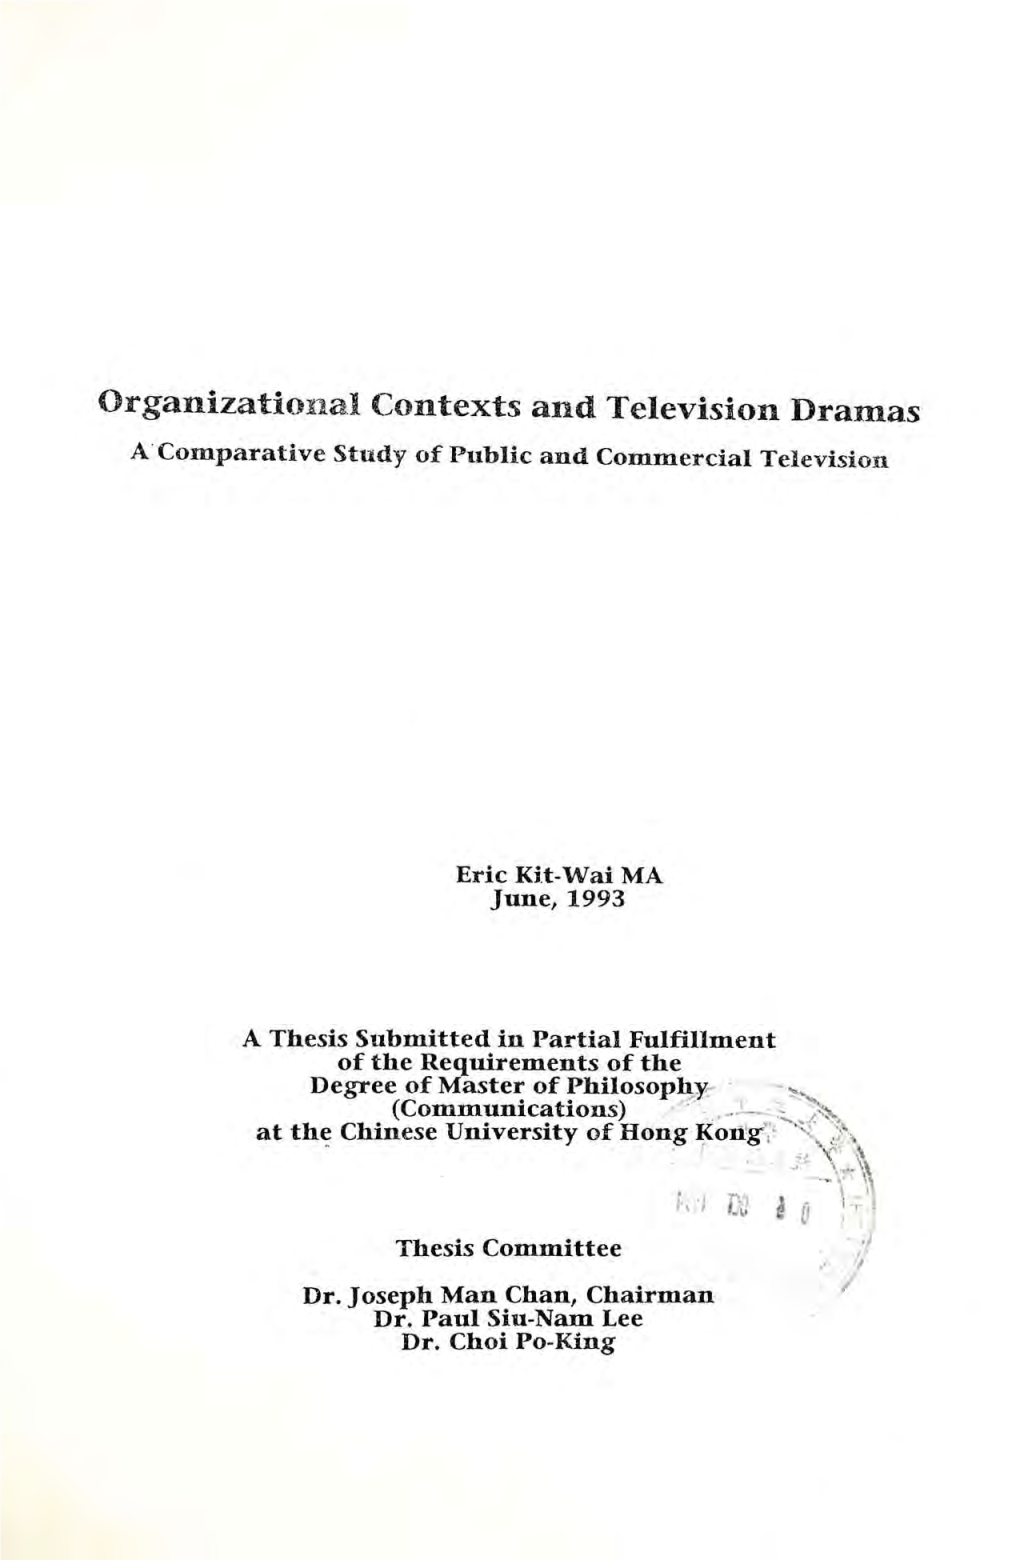 Organizational Contexts and Television Dramas a Comparative Study of Public and Commercial Television